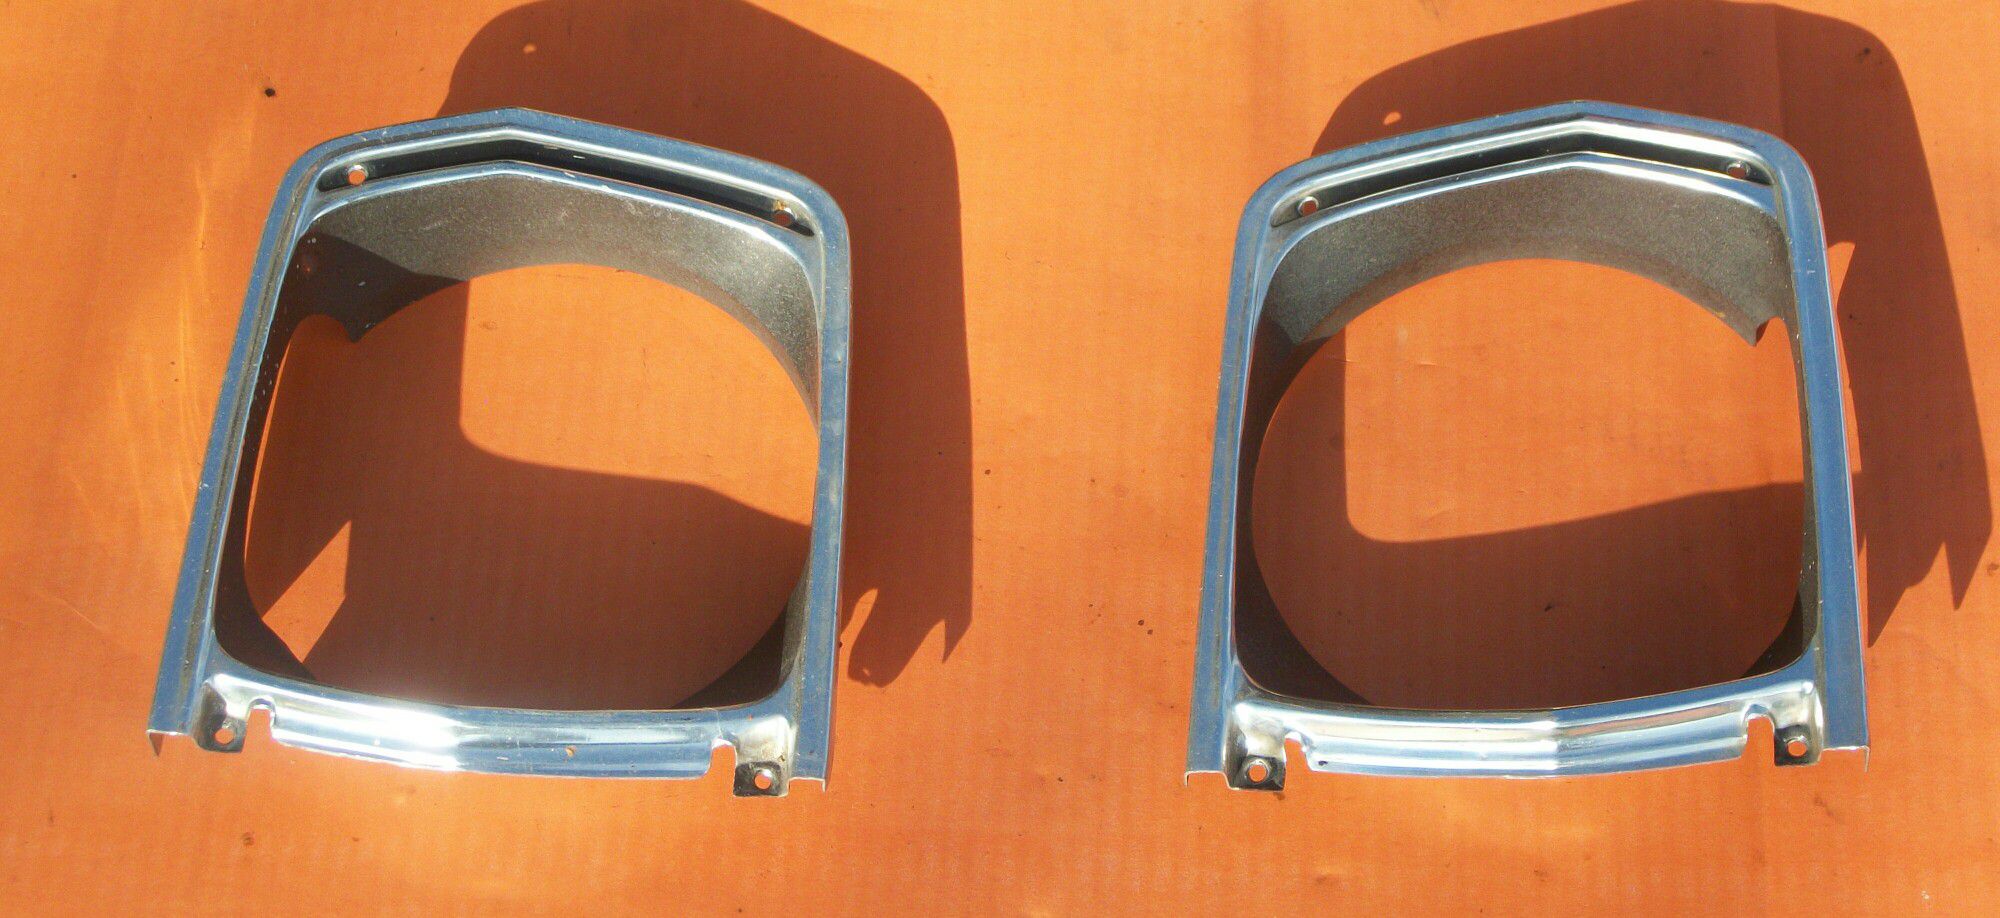 69 PLYMOUTH VALIANT FACTORY (USED) HEADLIGHT BEZELS AND GRILLS